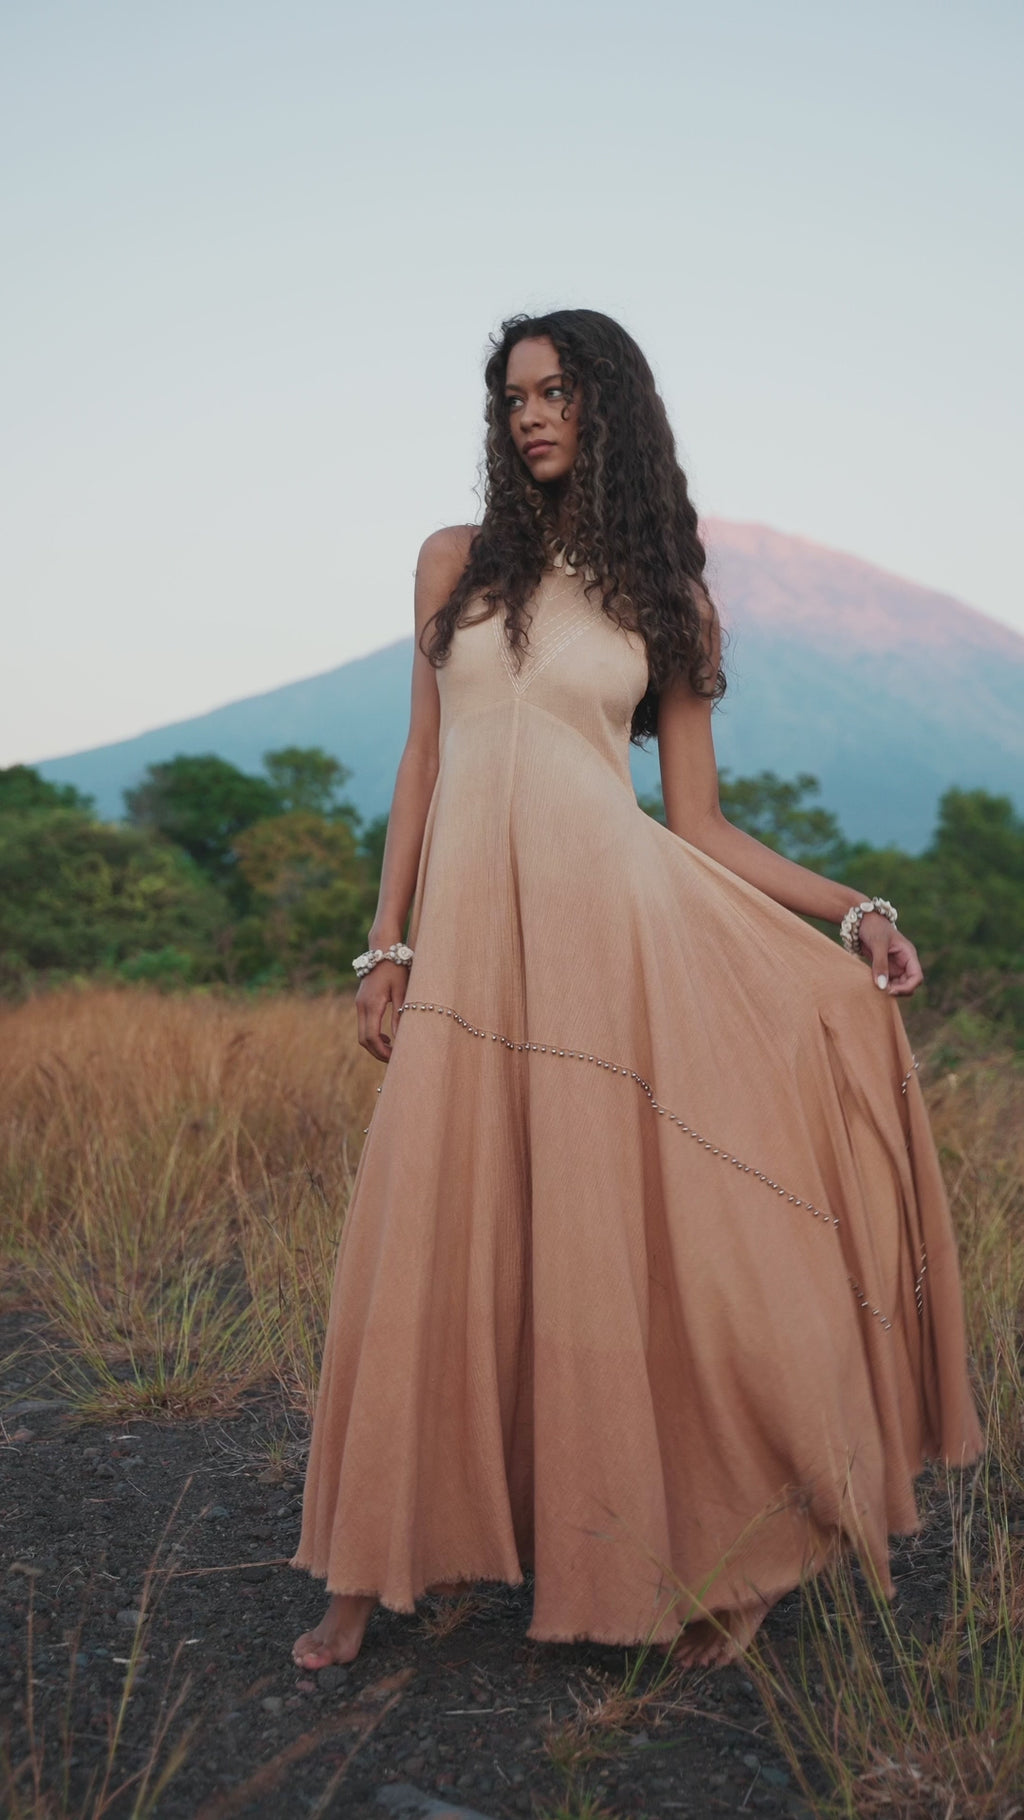 Get noticed with Aya Sacred Wear's Powder Pink Small Bells Dress